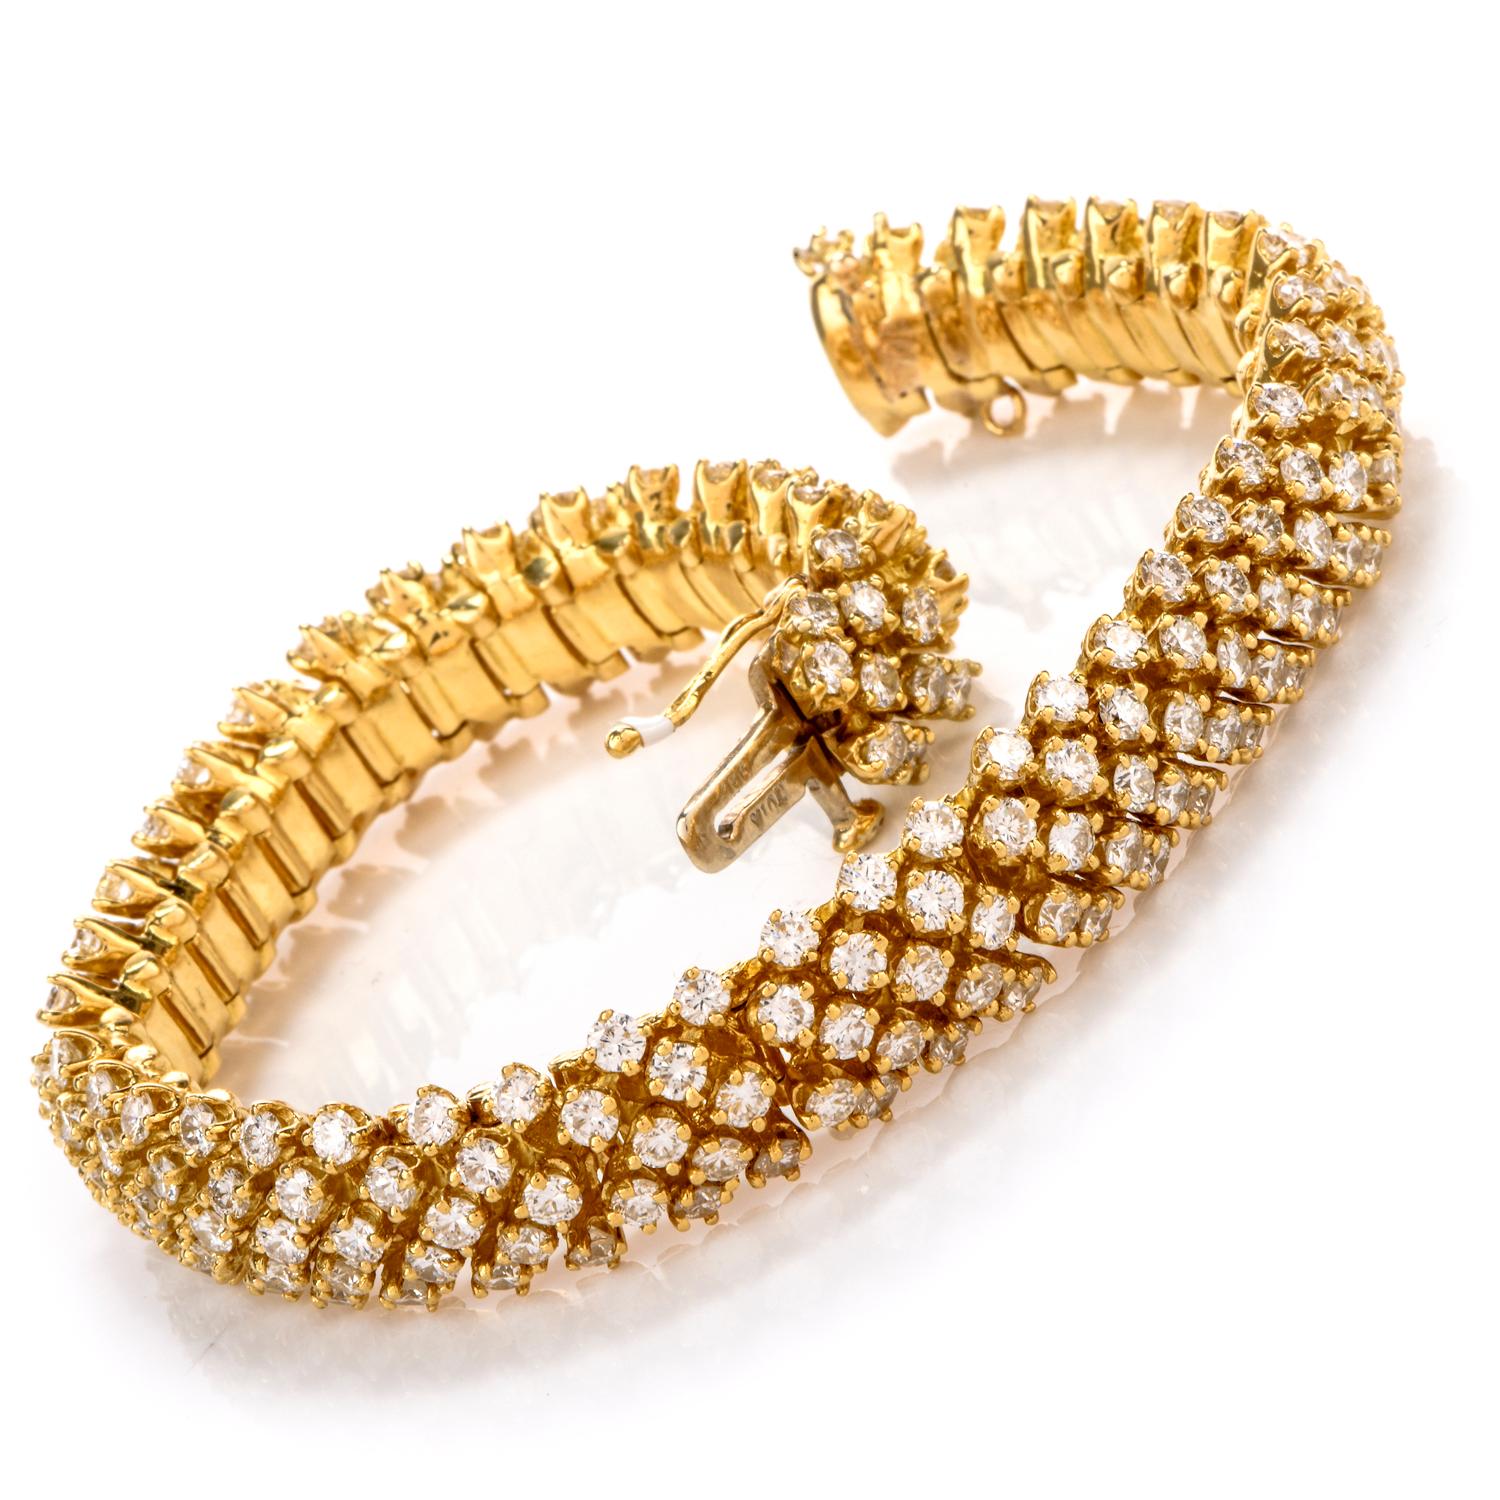 The Stunning 1960's Domed Bracelet was crafted in 18K Gold. The flexible Statement Bracelet was created to Radiate everywhere as each link has several prong set diamonds that complete the look throughout. This Understated Elegance has a nicely